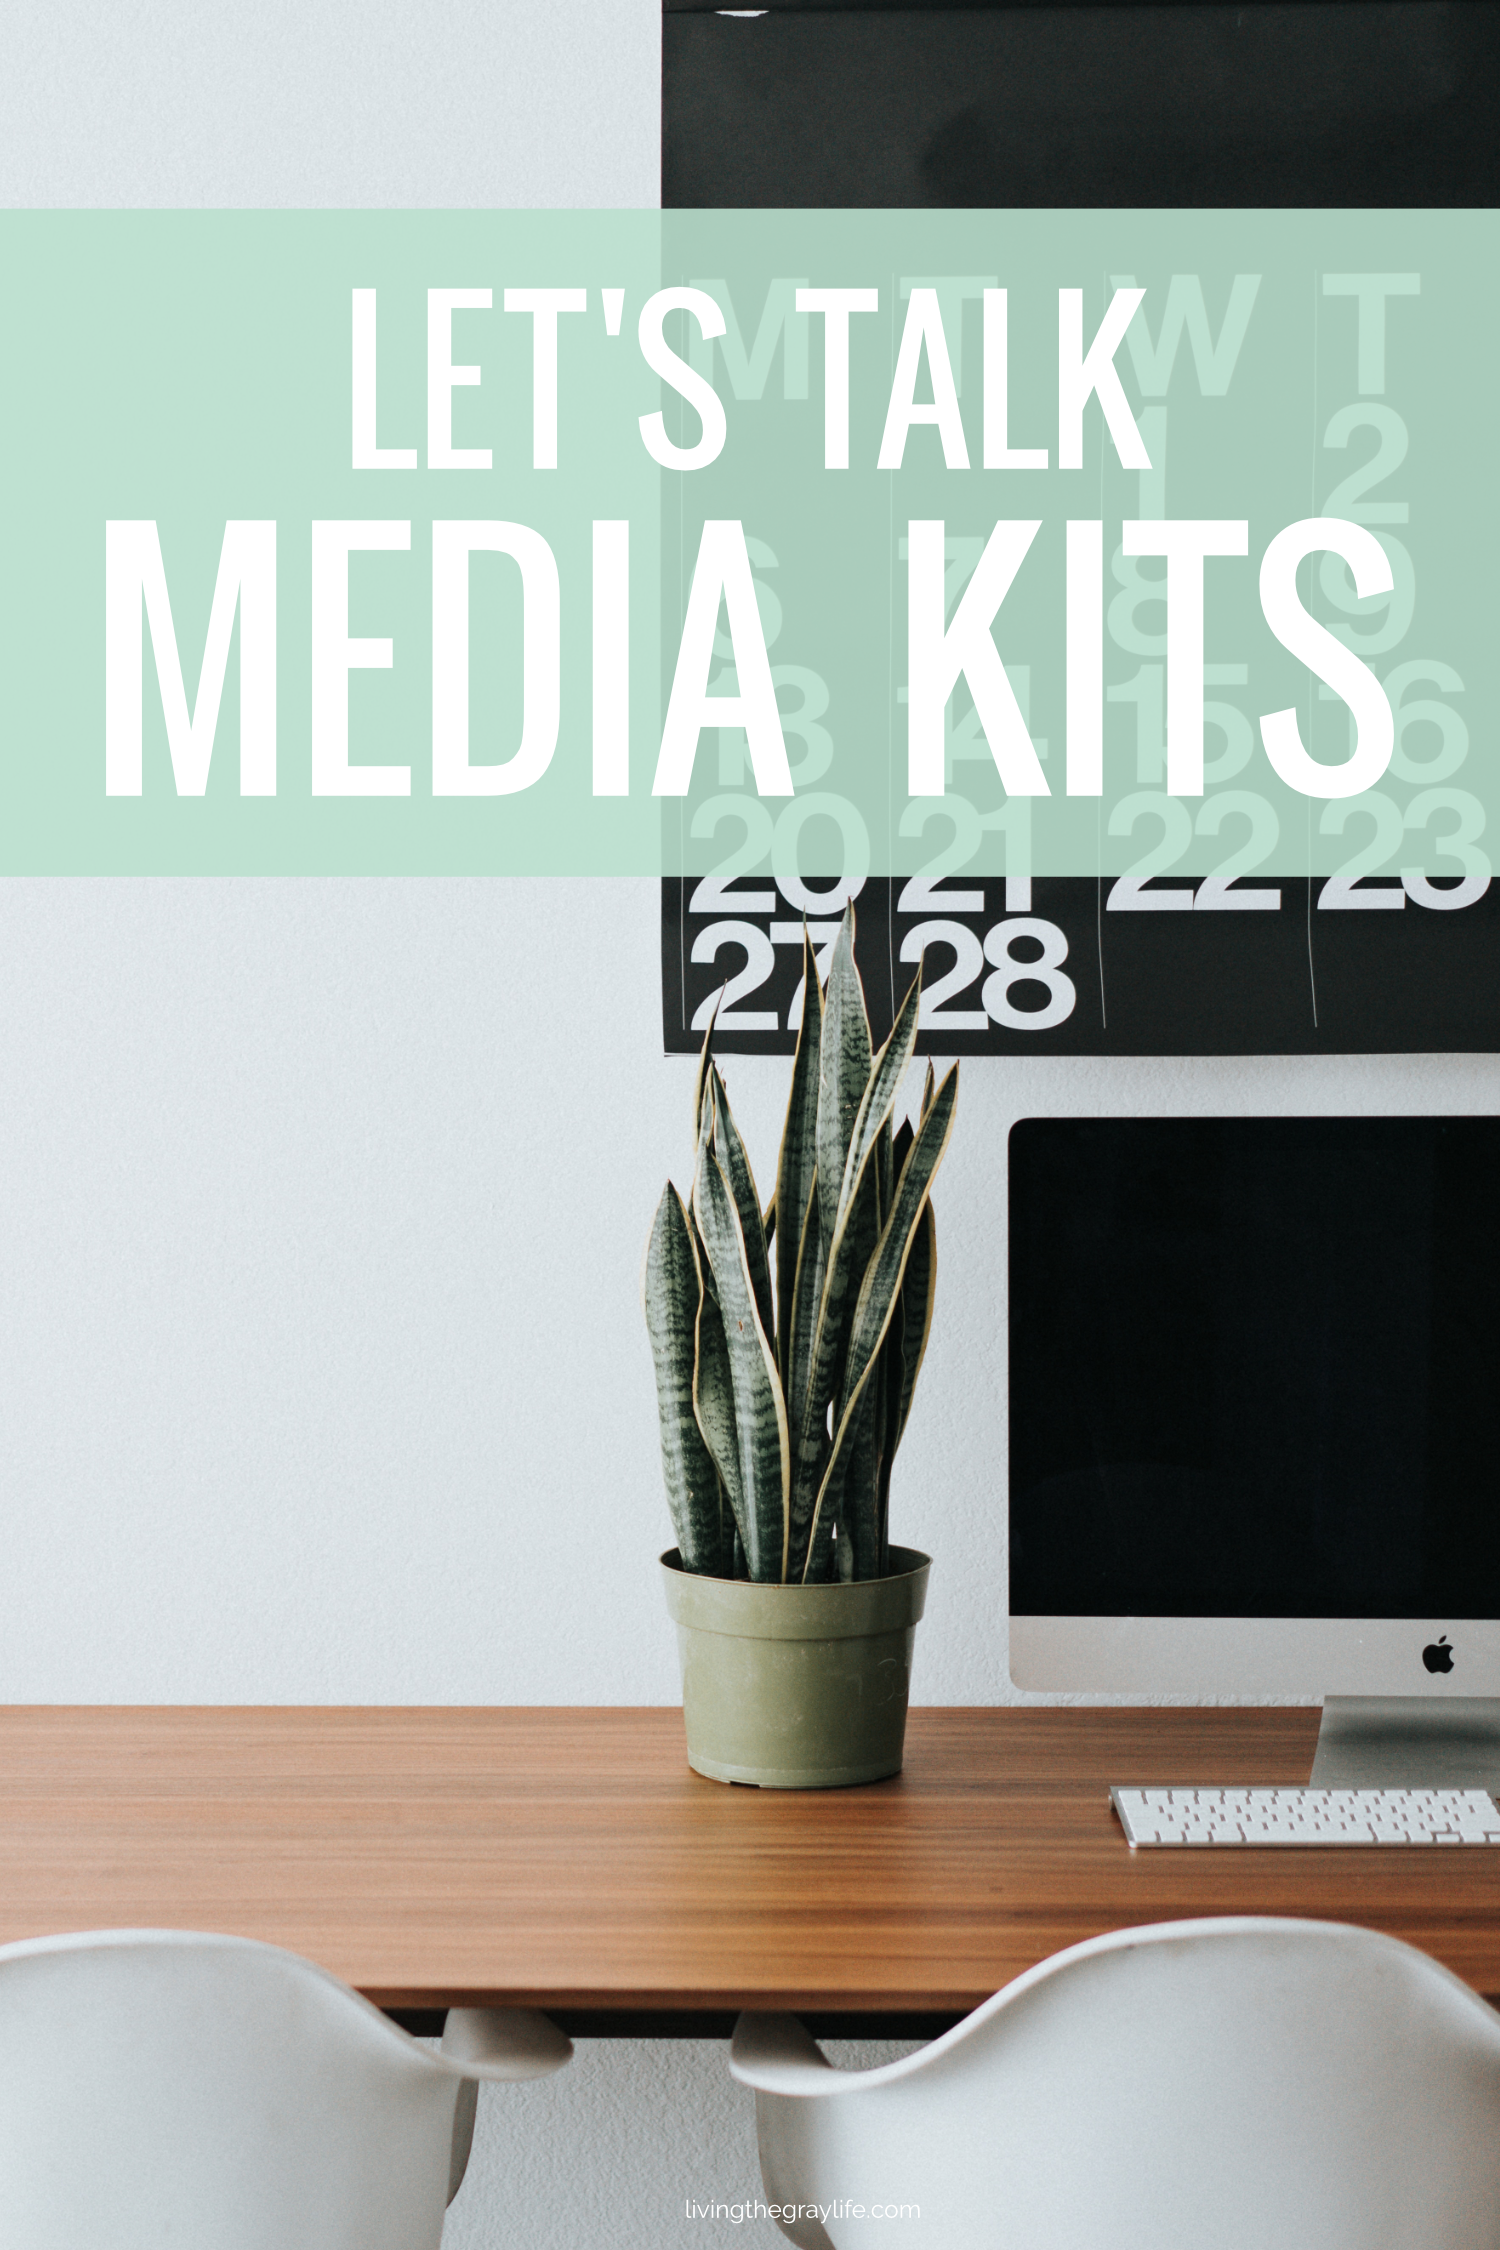 Having a media kit is essential for any size blogger. Learn how I made mine, what to include, and where to find design inspo!